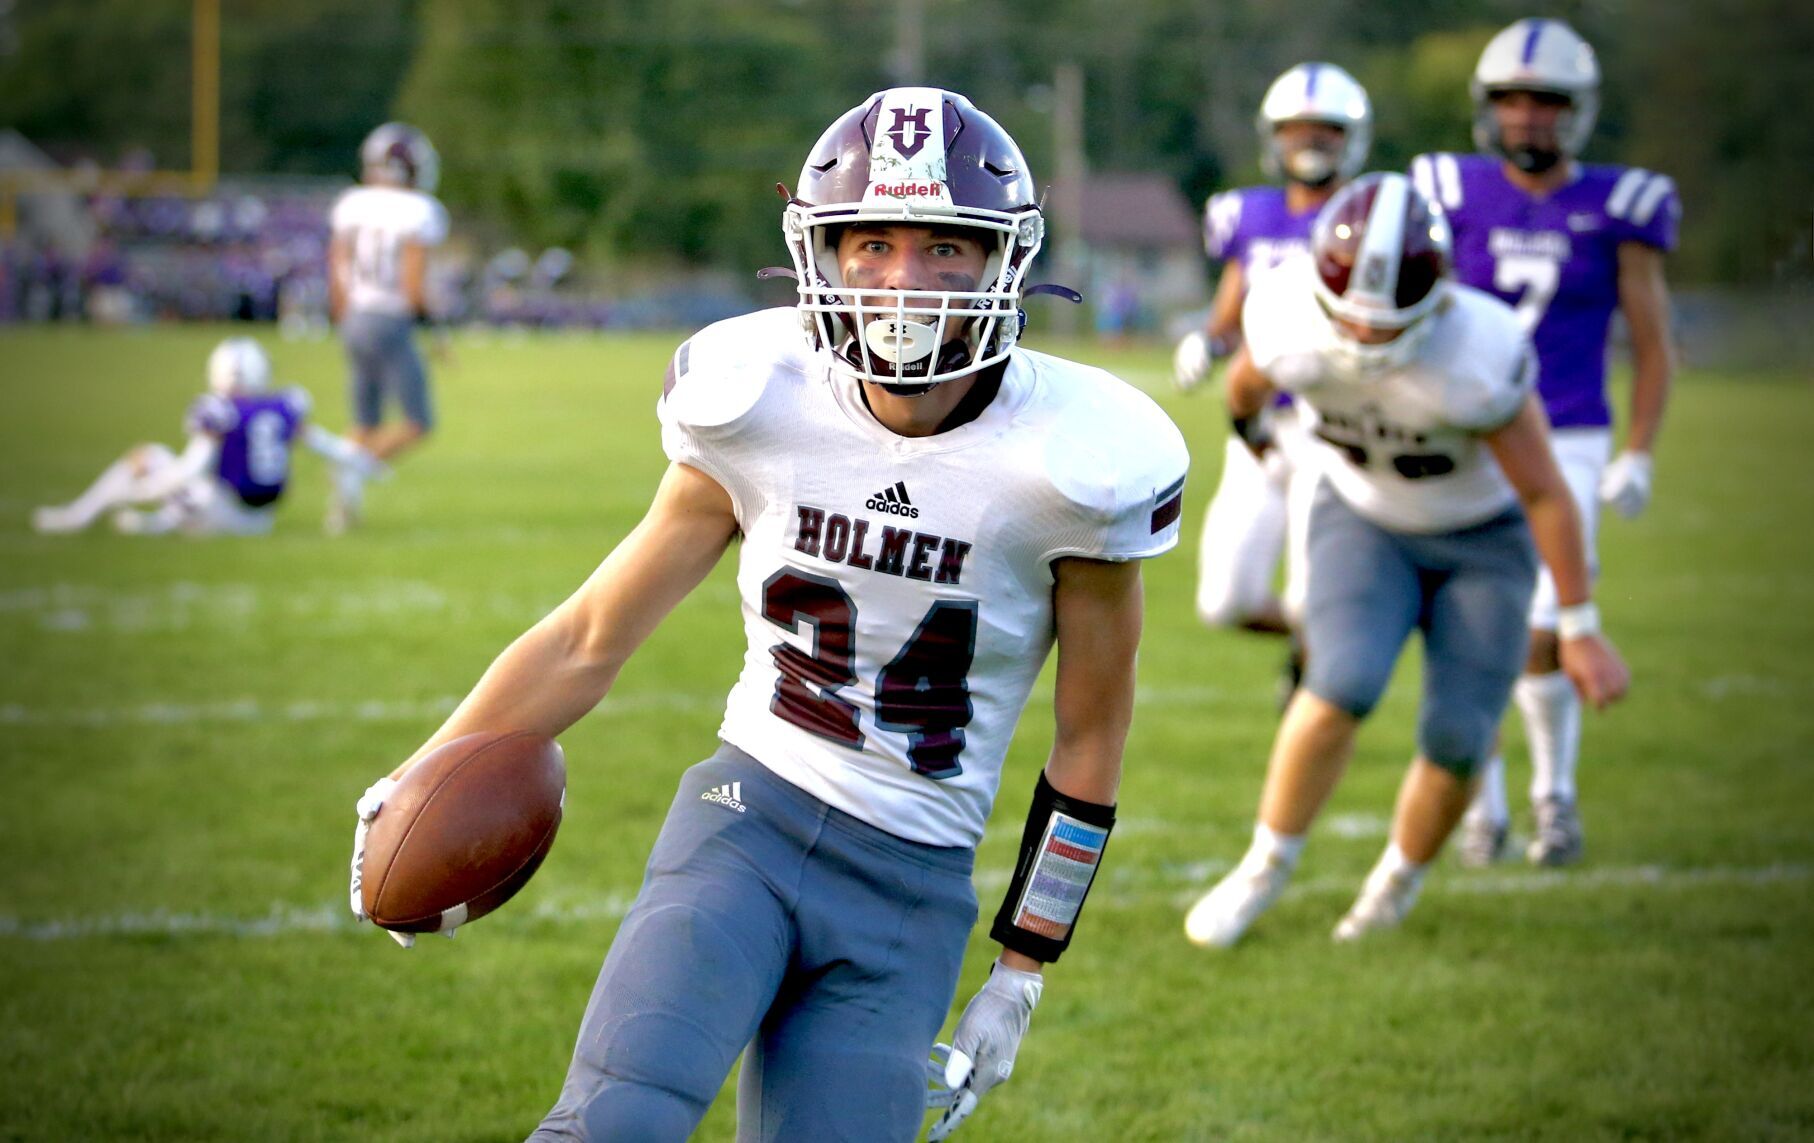 Holmen High School defeats Sparta in a close game with a late field goal